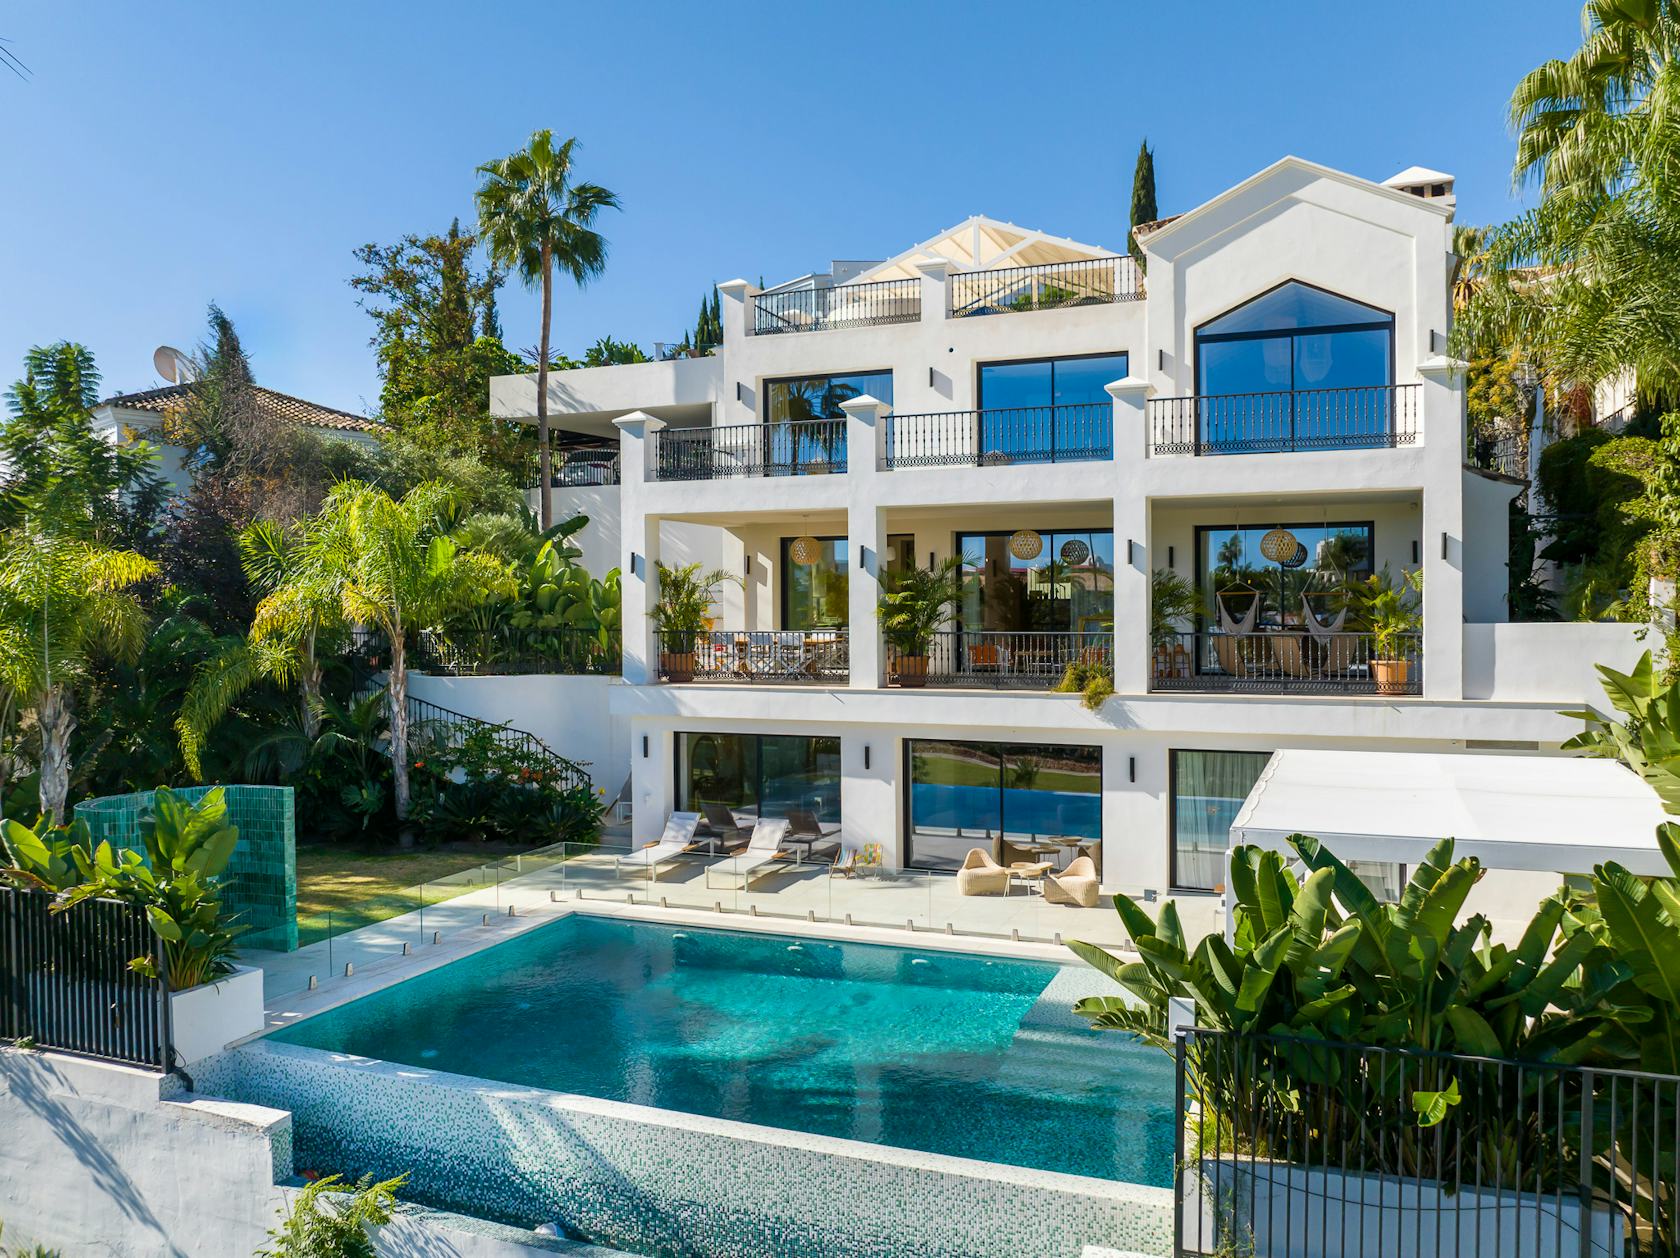 Steps to buying a luxury property: A comprehensive guide